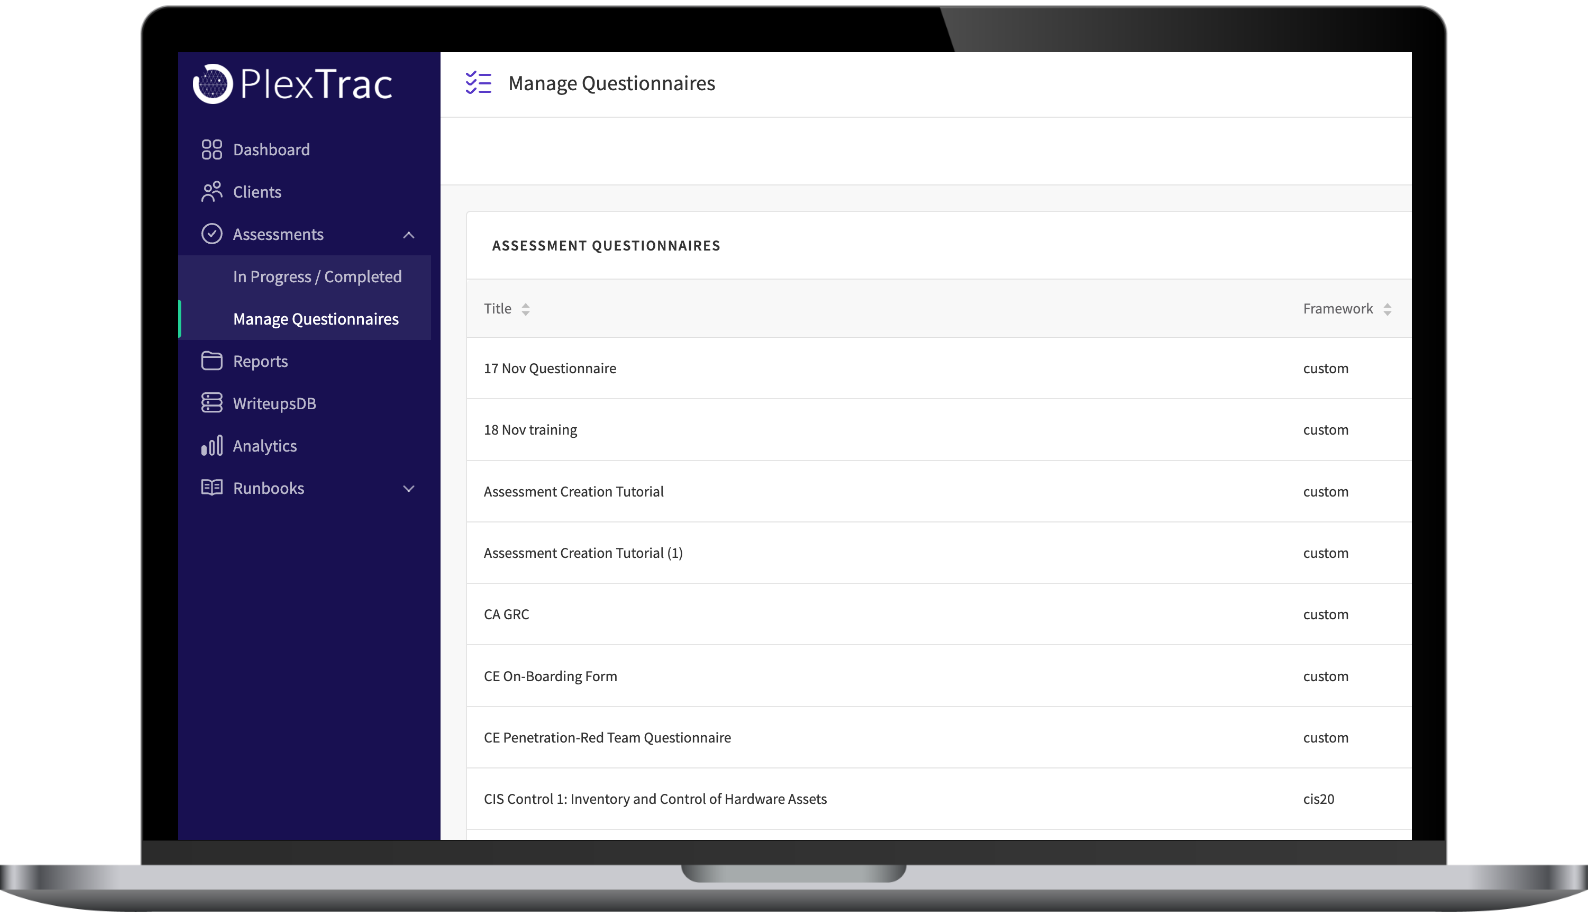 Create, deliver, and analyze assessments all inside the PlexTrac platform